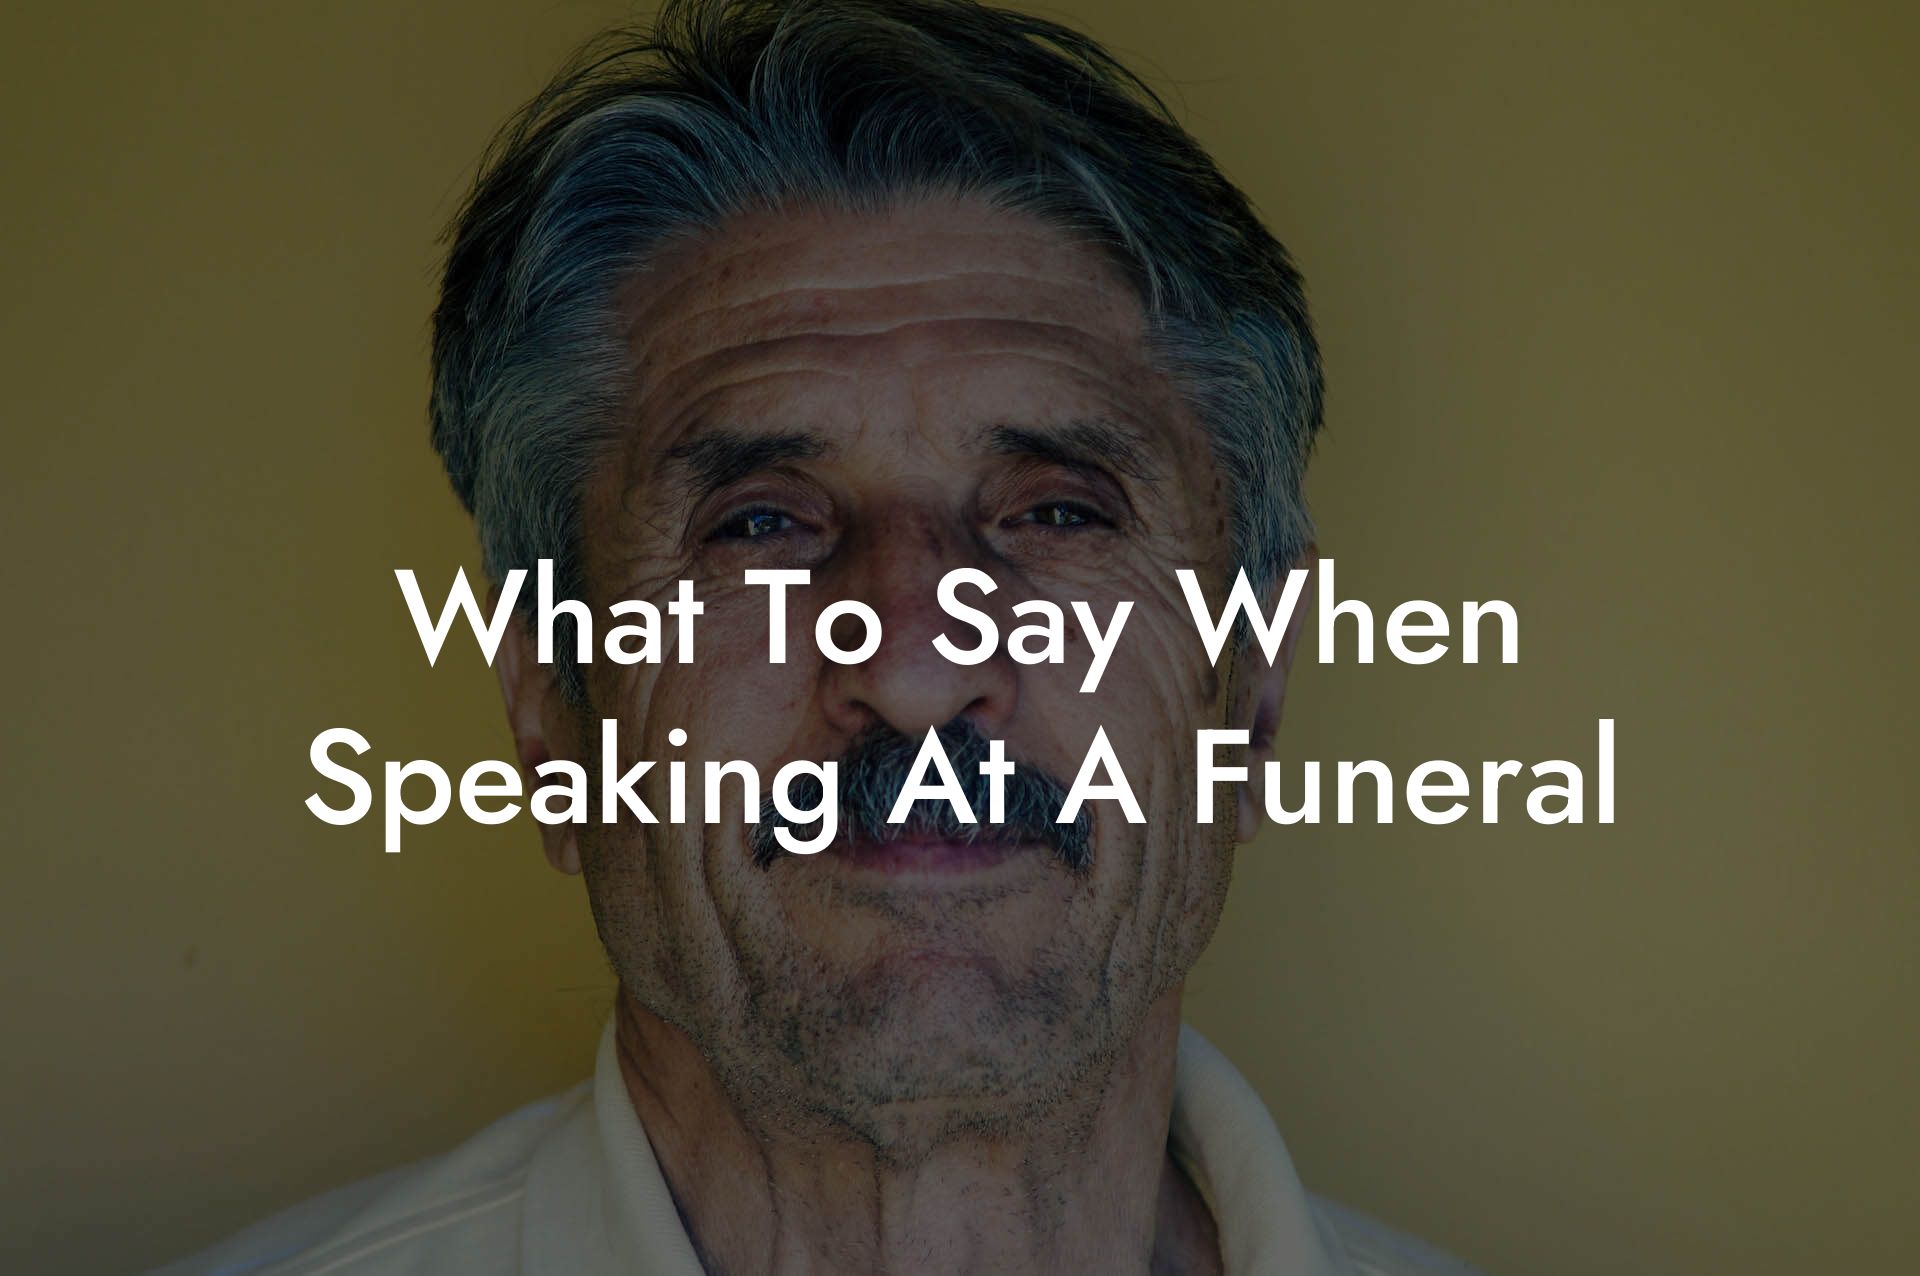 What To Say When Speaking At A Funeral